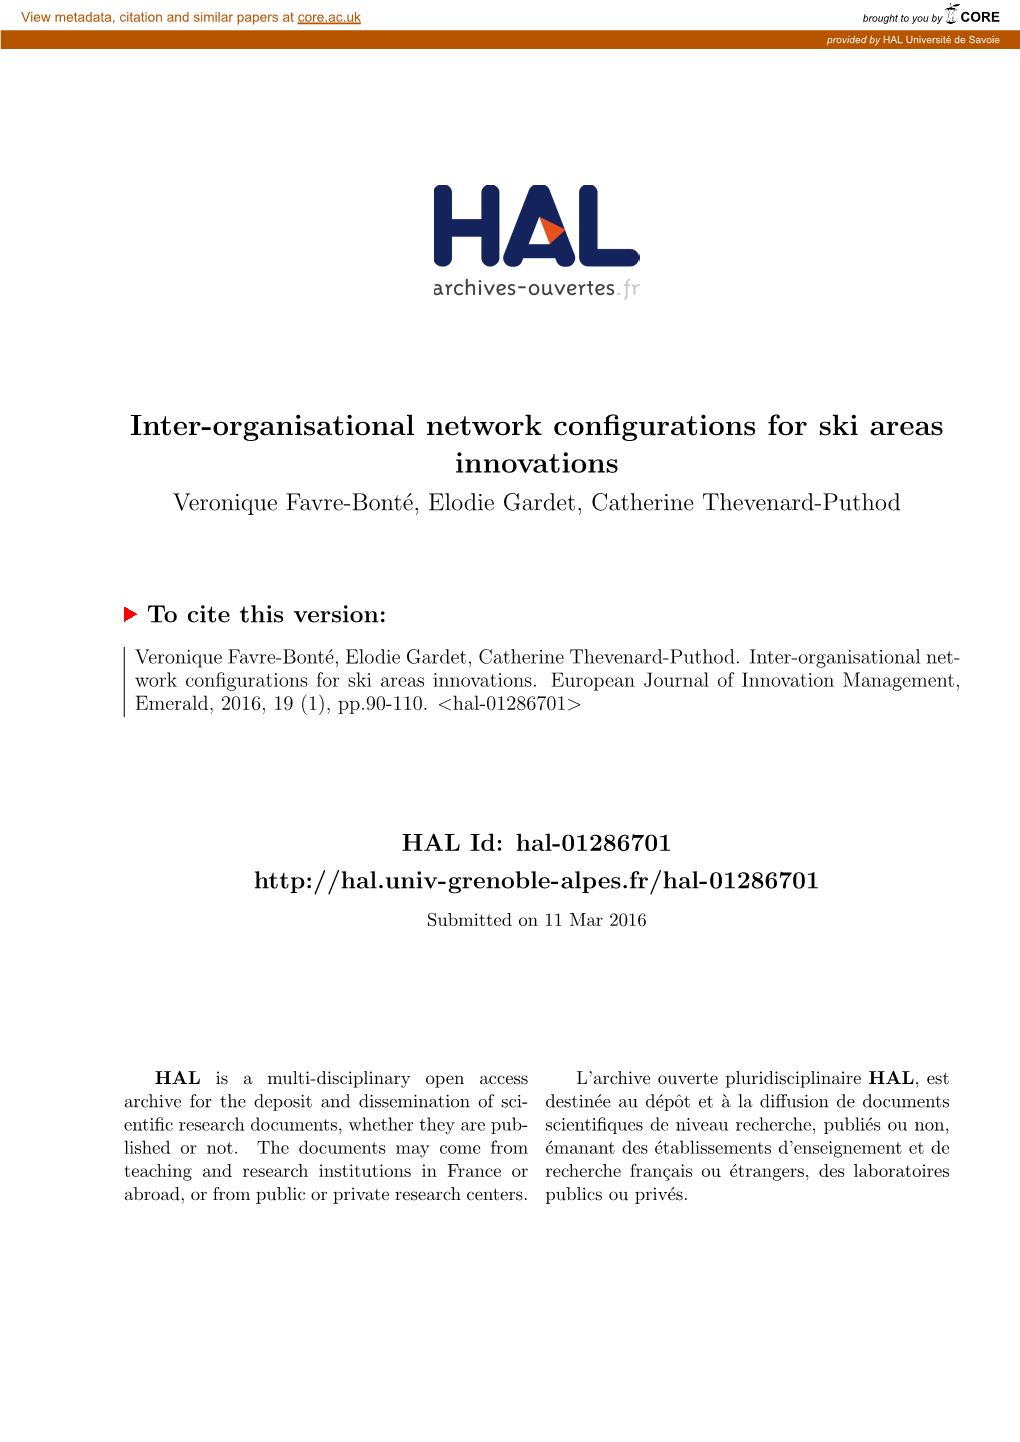 Inter-Organisational Network Configurations for Ski Areas Innovations